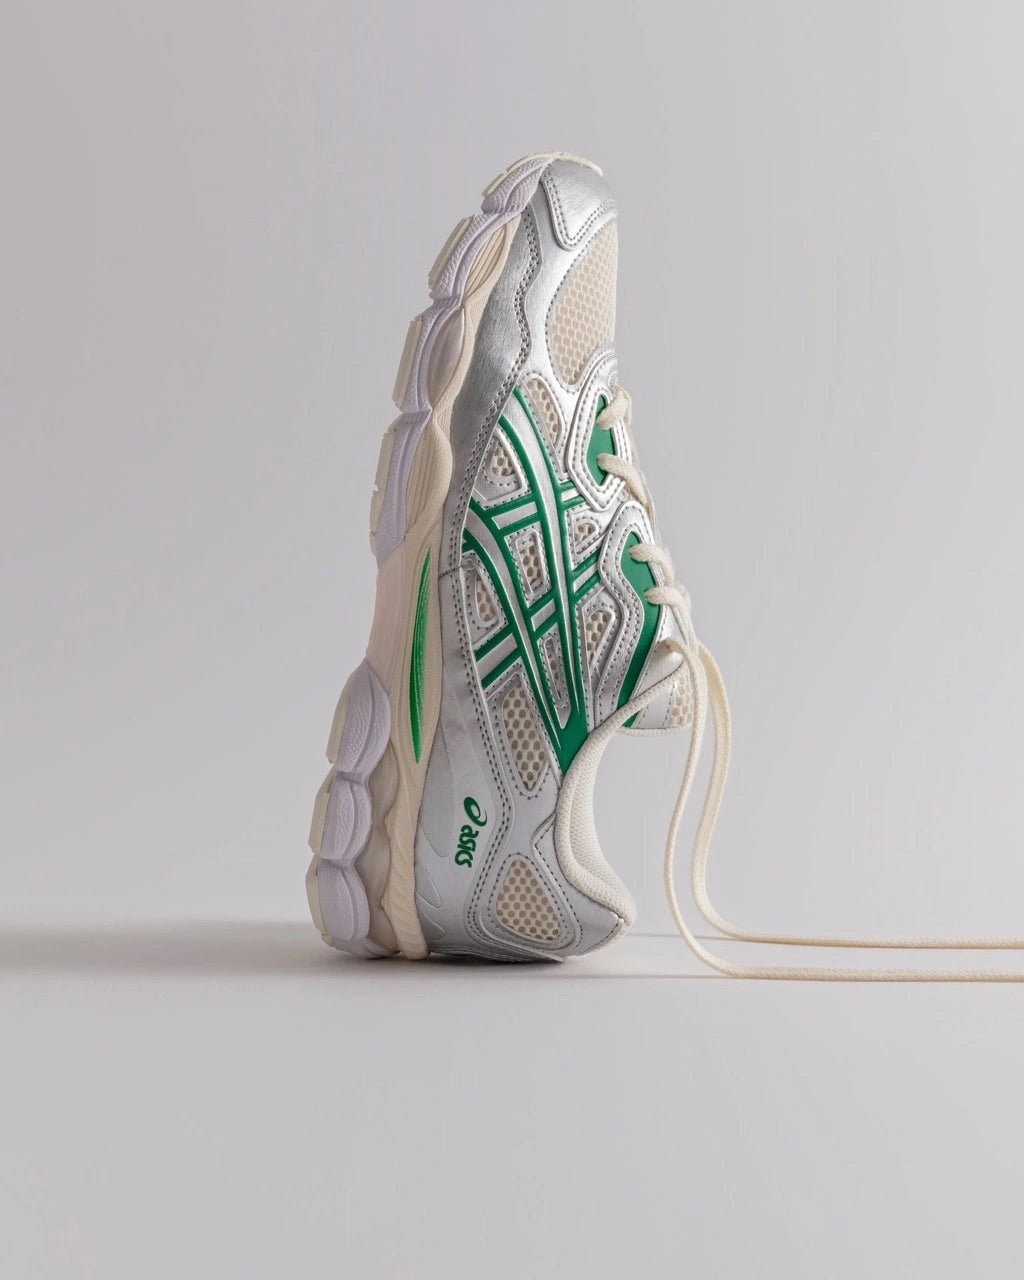 Image of a studio shot of the ASICS GEL-NYC on a studio background suspended upwards